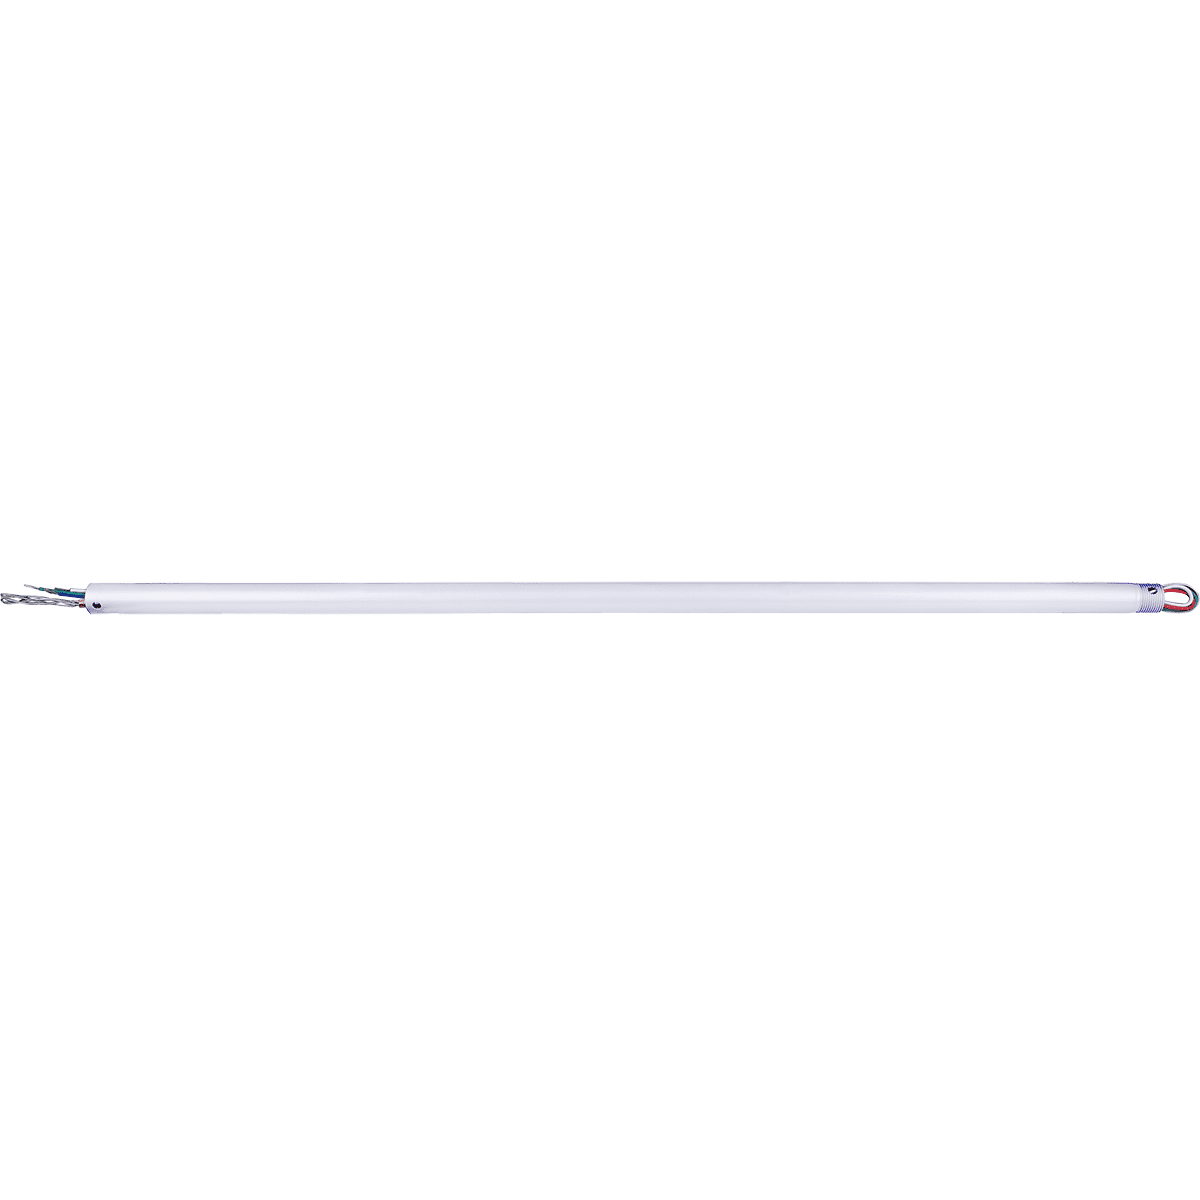 Canarm Optional 36-in Downrod For FANBOS Fans - White (DR36-CPWH)